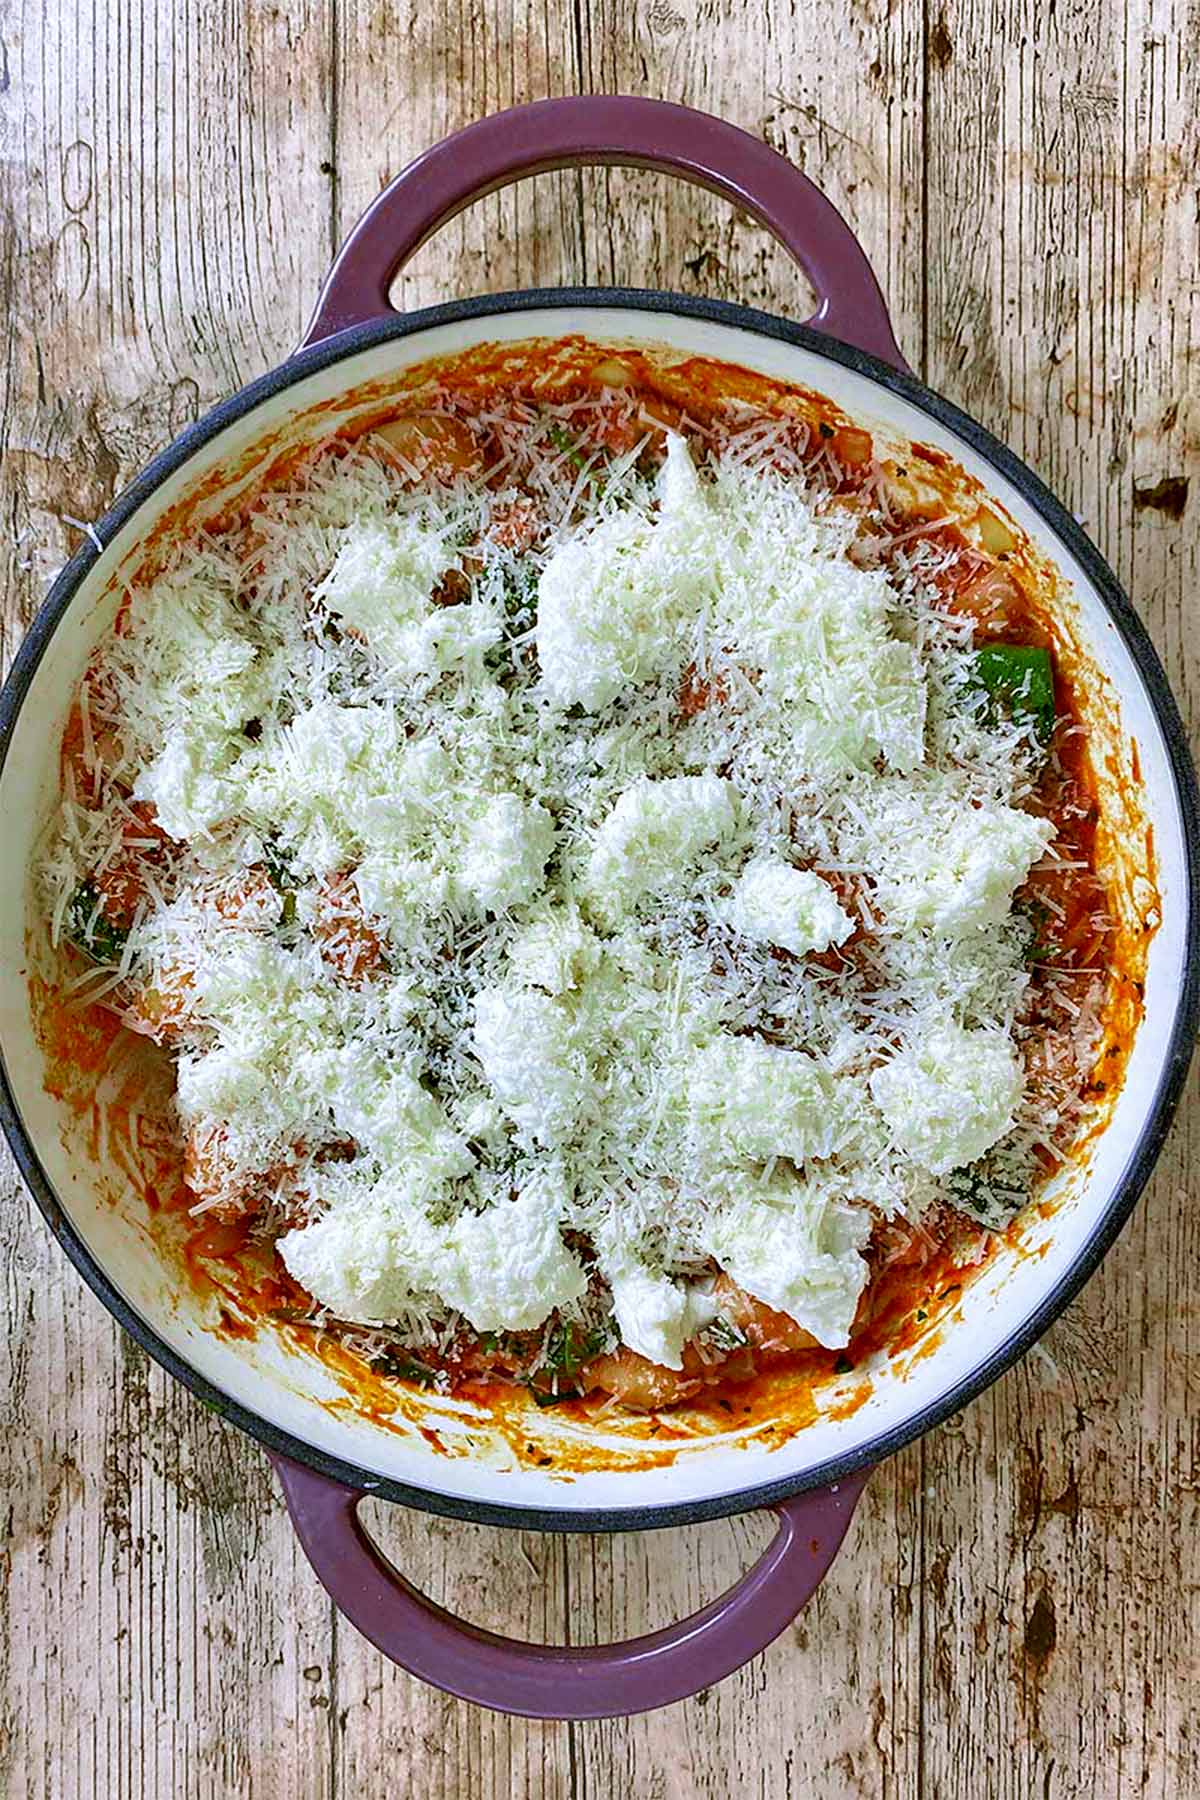 Gnocchi bake covered in grated Parmesan and chunks of mozzarella.